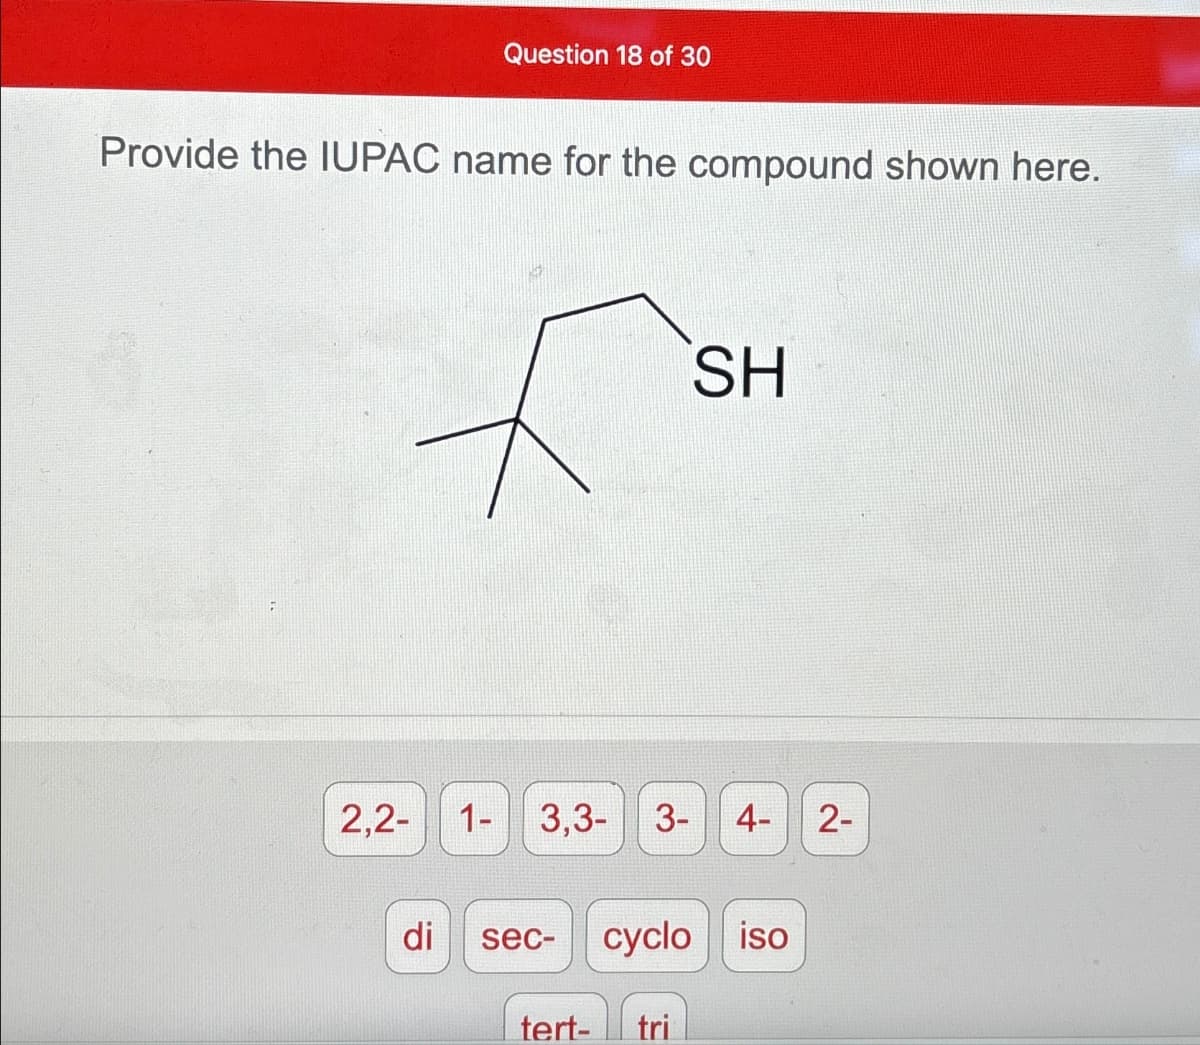 Question 18 of 30
Provide the IUPAC name for the compound shown here.
SH
2,2-
1-
3,3- 3- 4- 2-
di
sec- cyclo iso
tert- tri